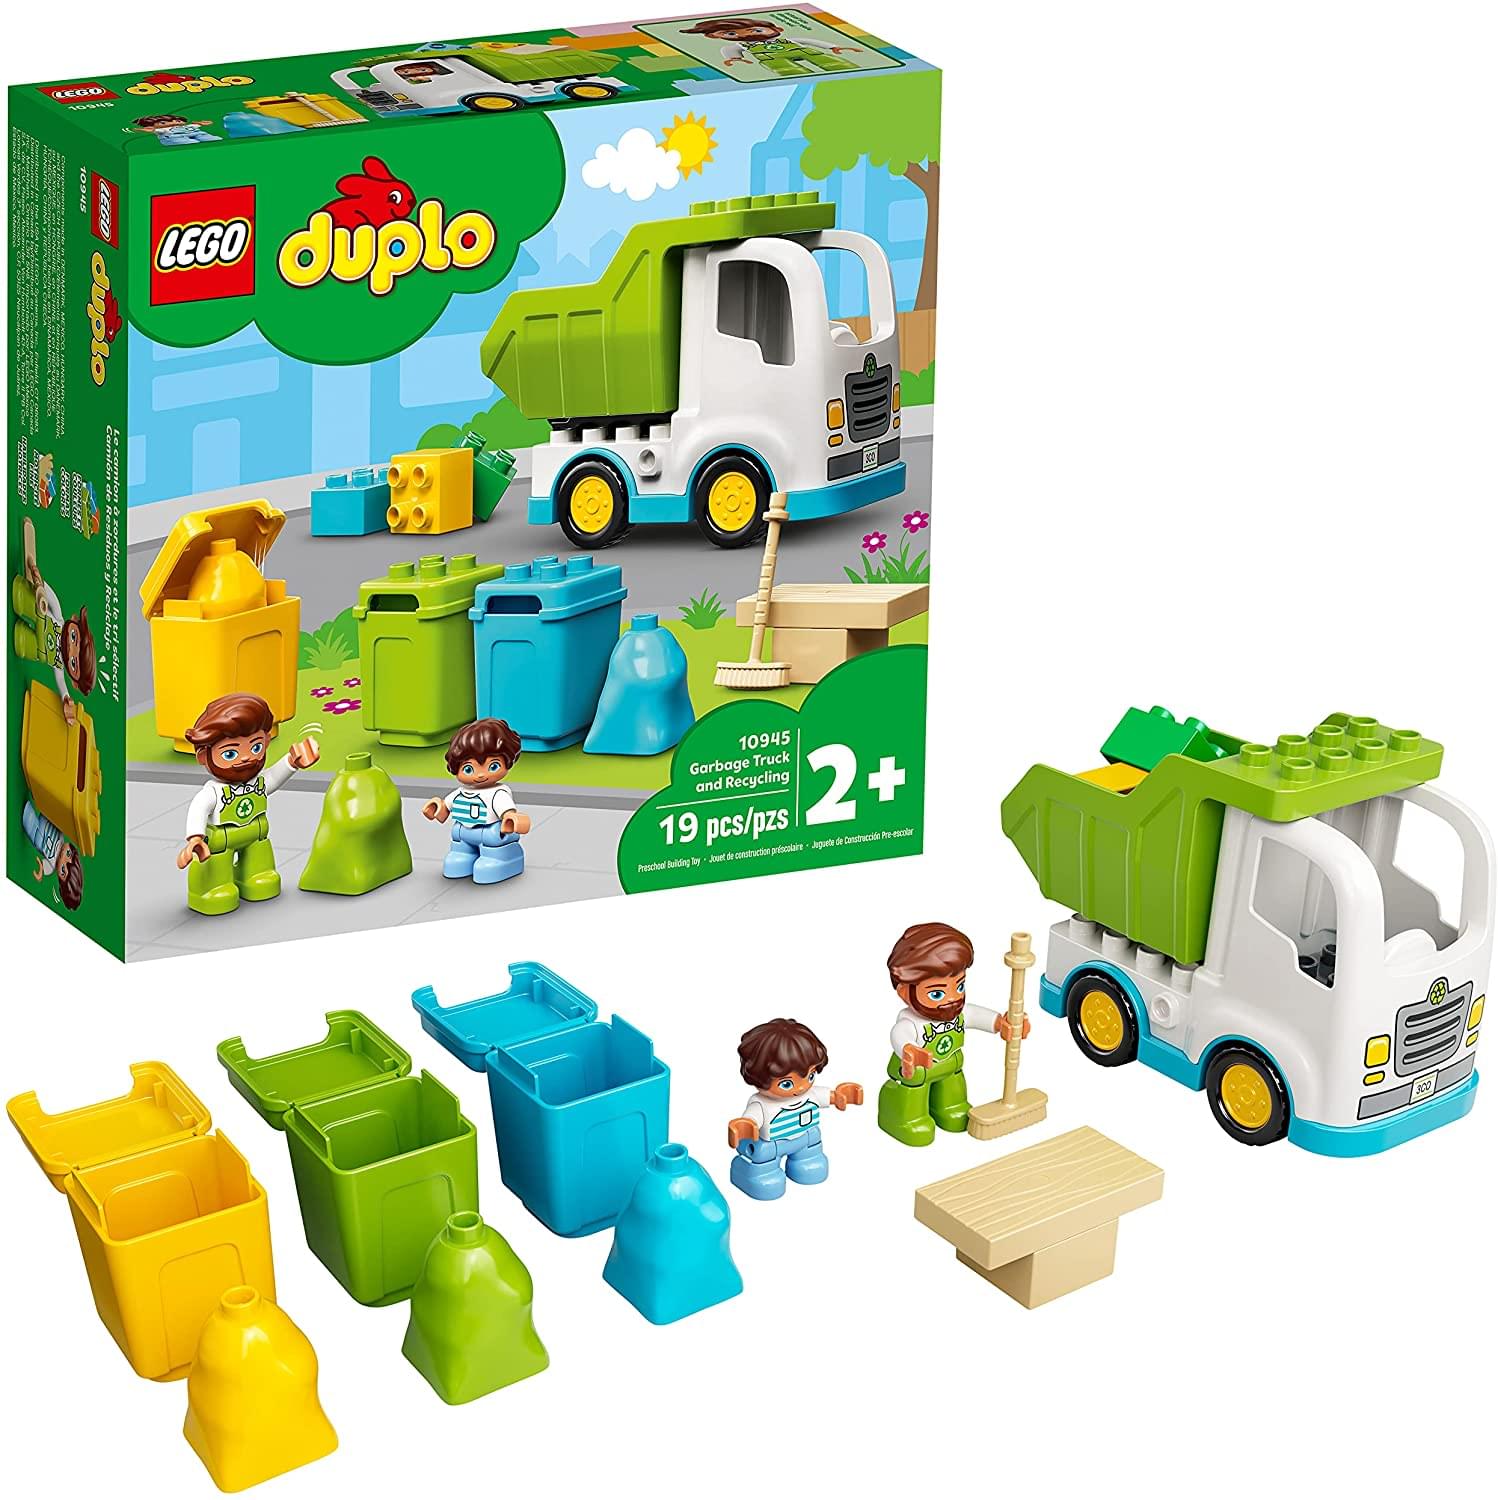 LEGO DUPLO 10945 Town Garbage Truck and Recycling 19 Piece Building Kit